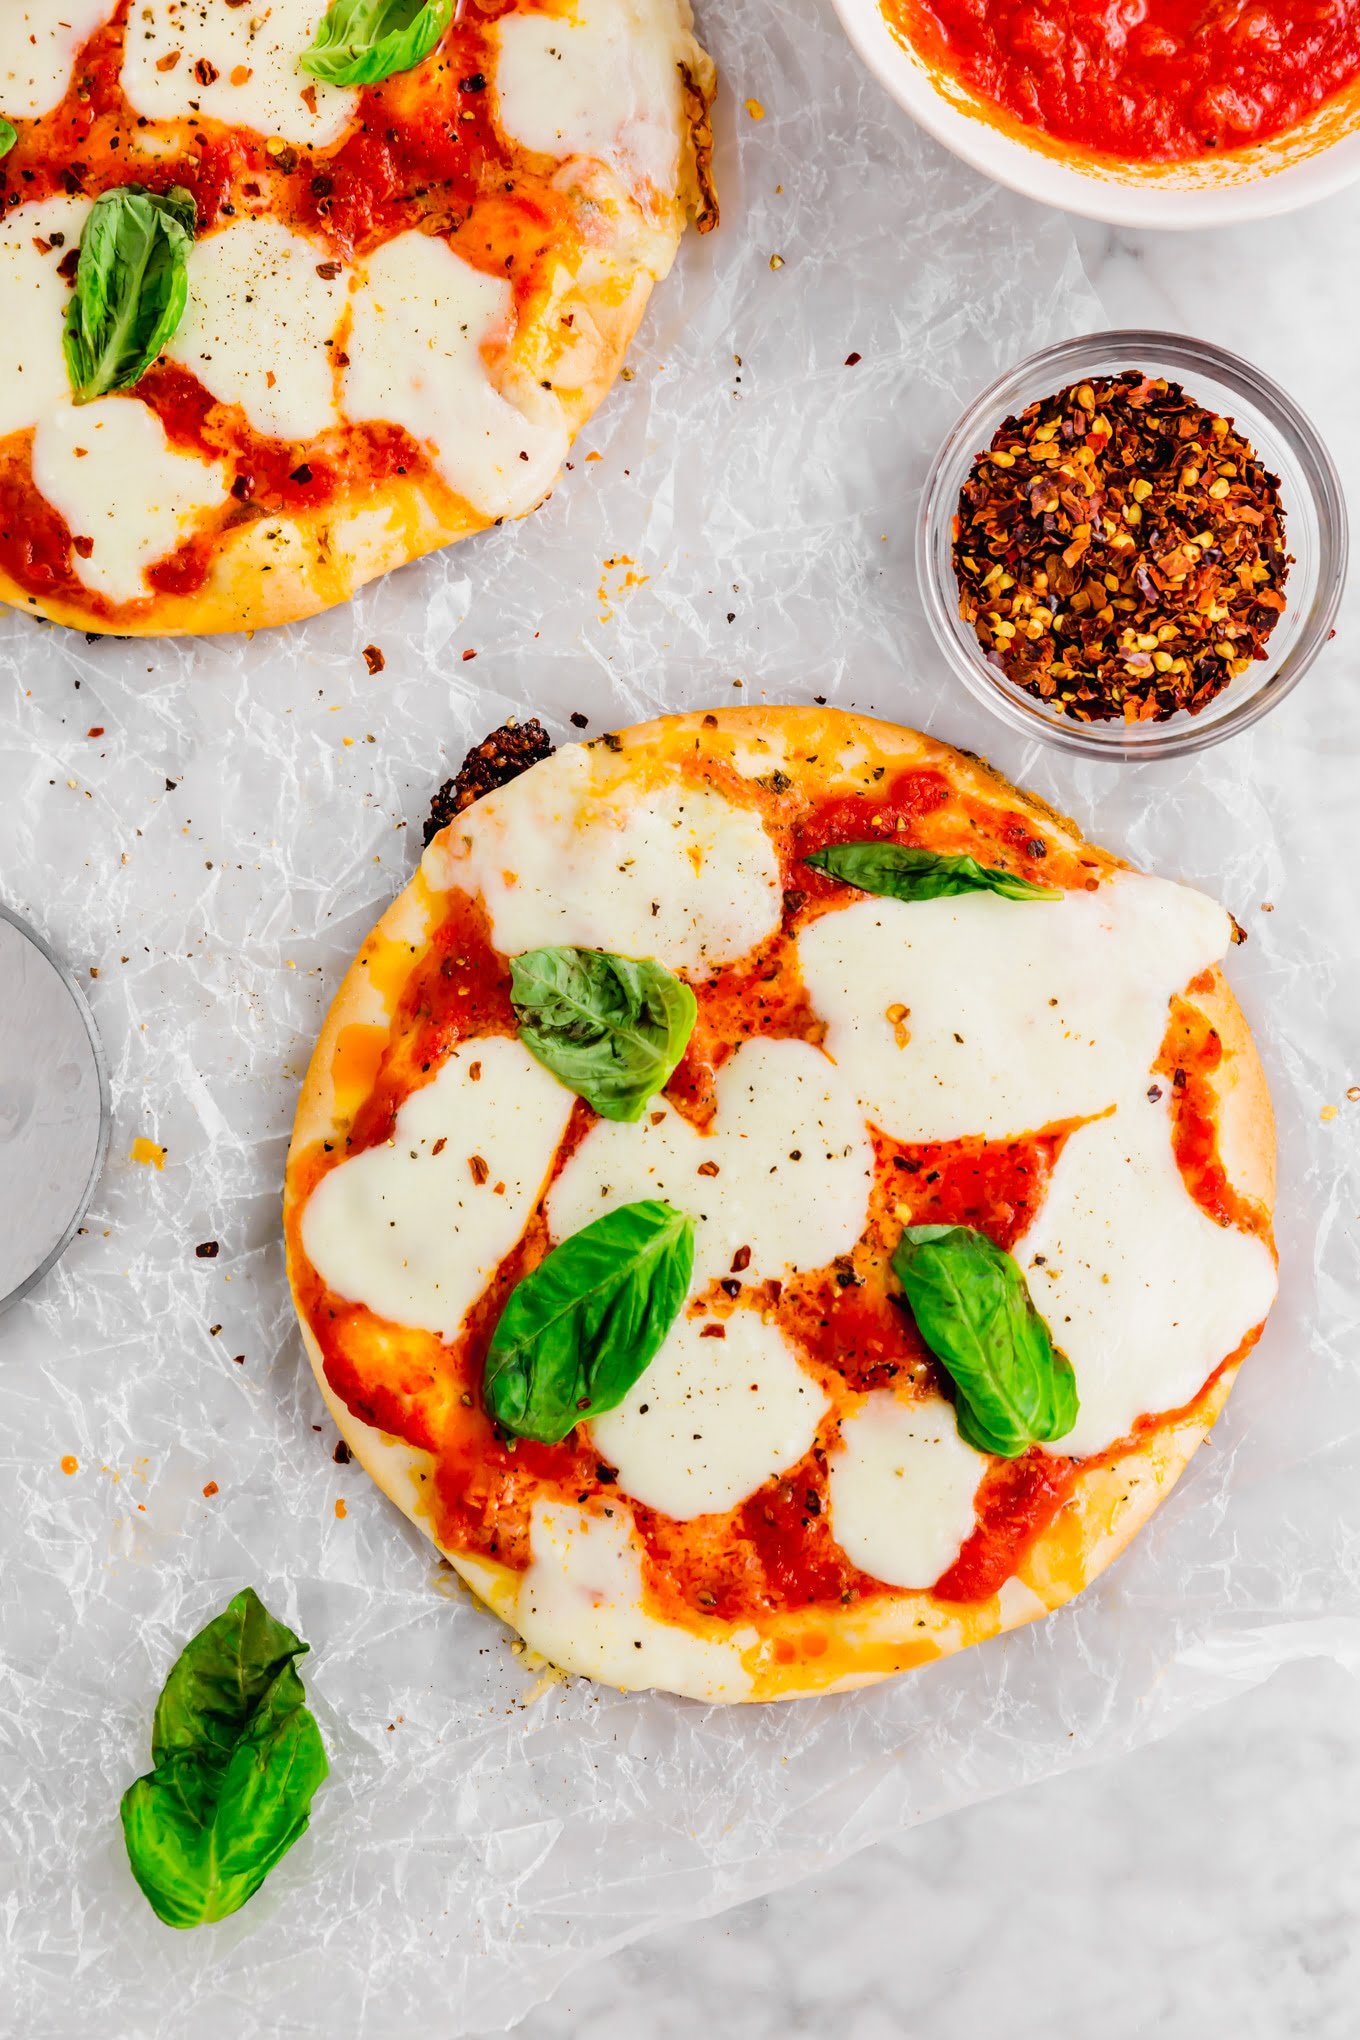 A photo of two gluten-free pita pizzas topped with fresh mozzarella and basil on parchment paper.